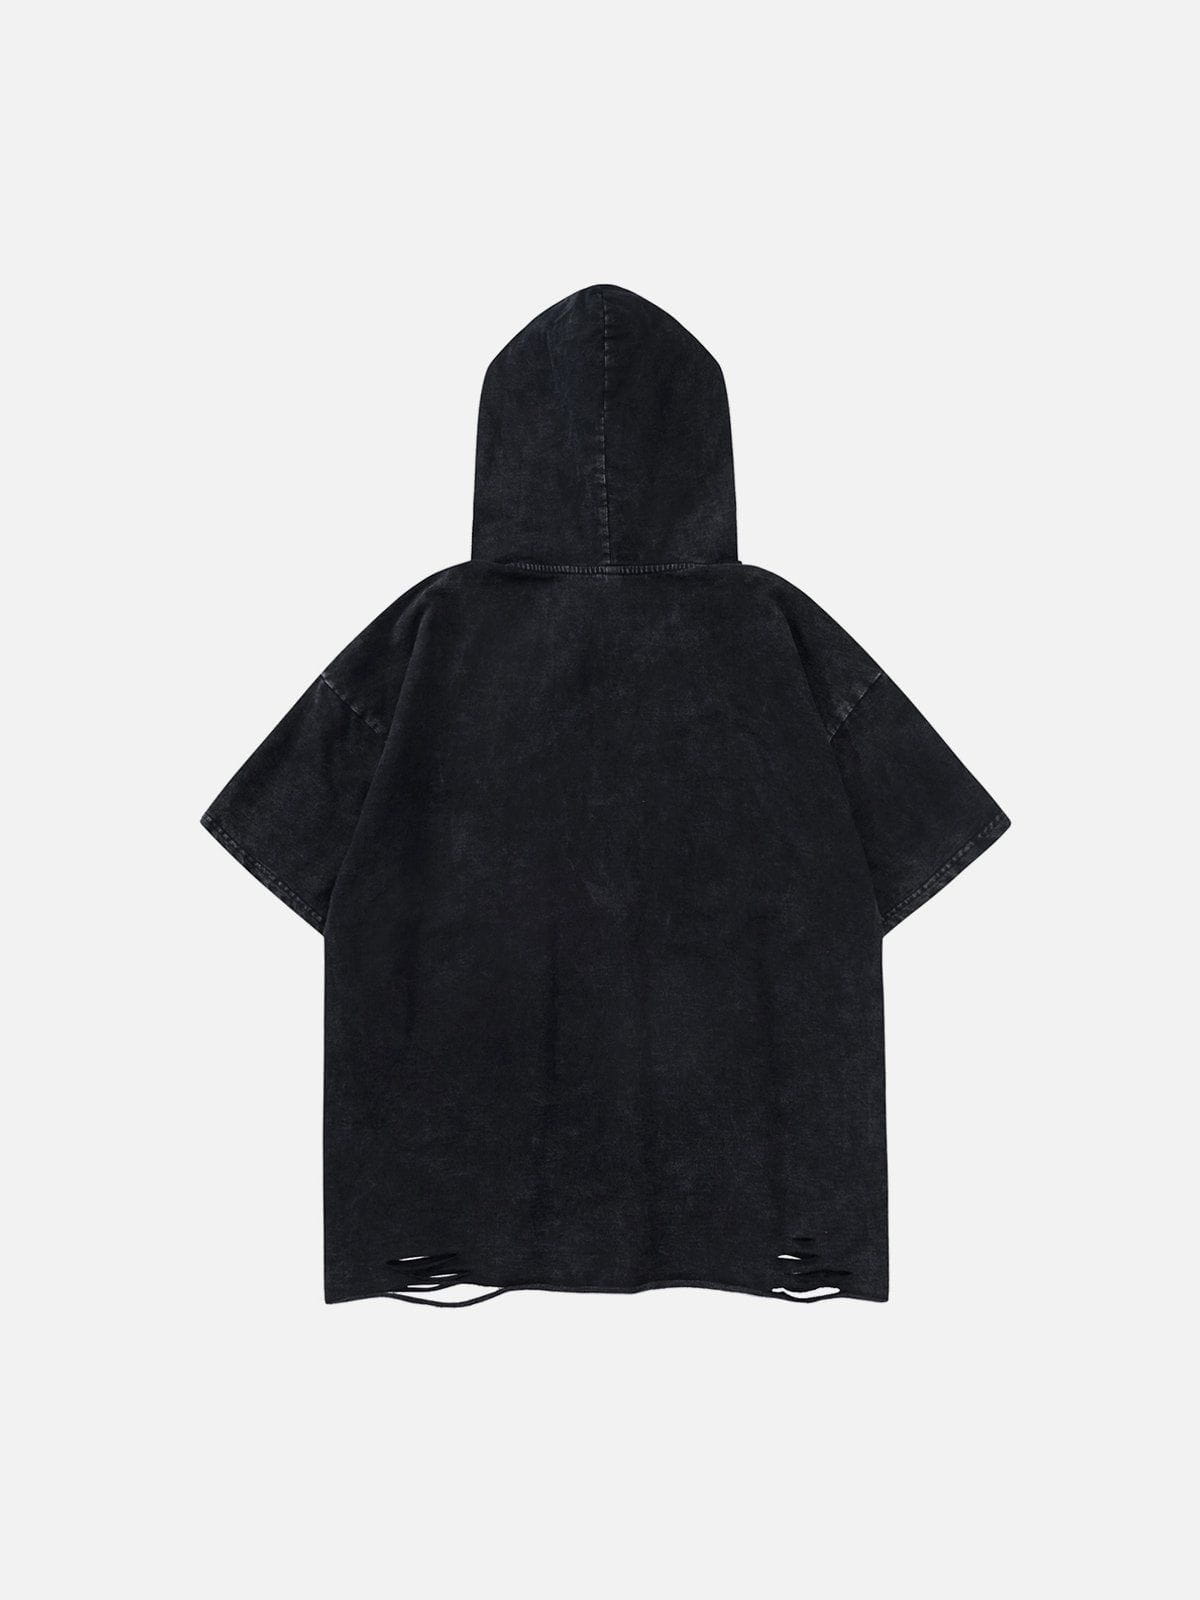 Aelfric Eden Horn Design Washed Hooded Tee